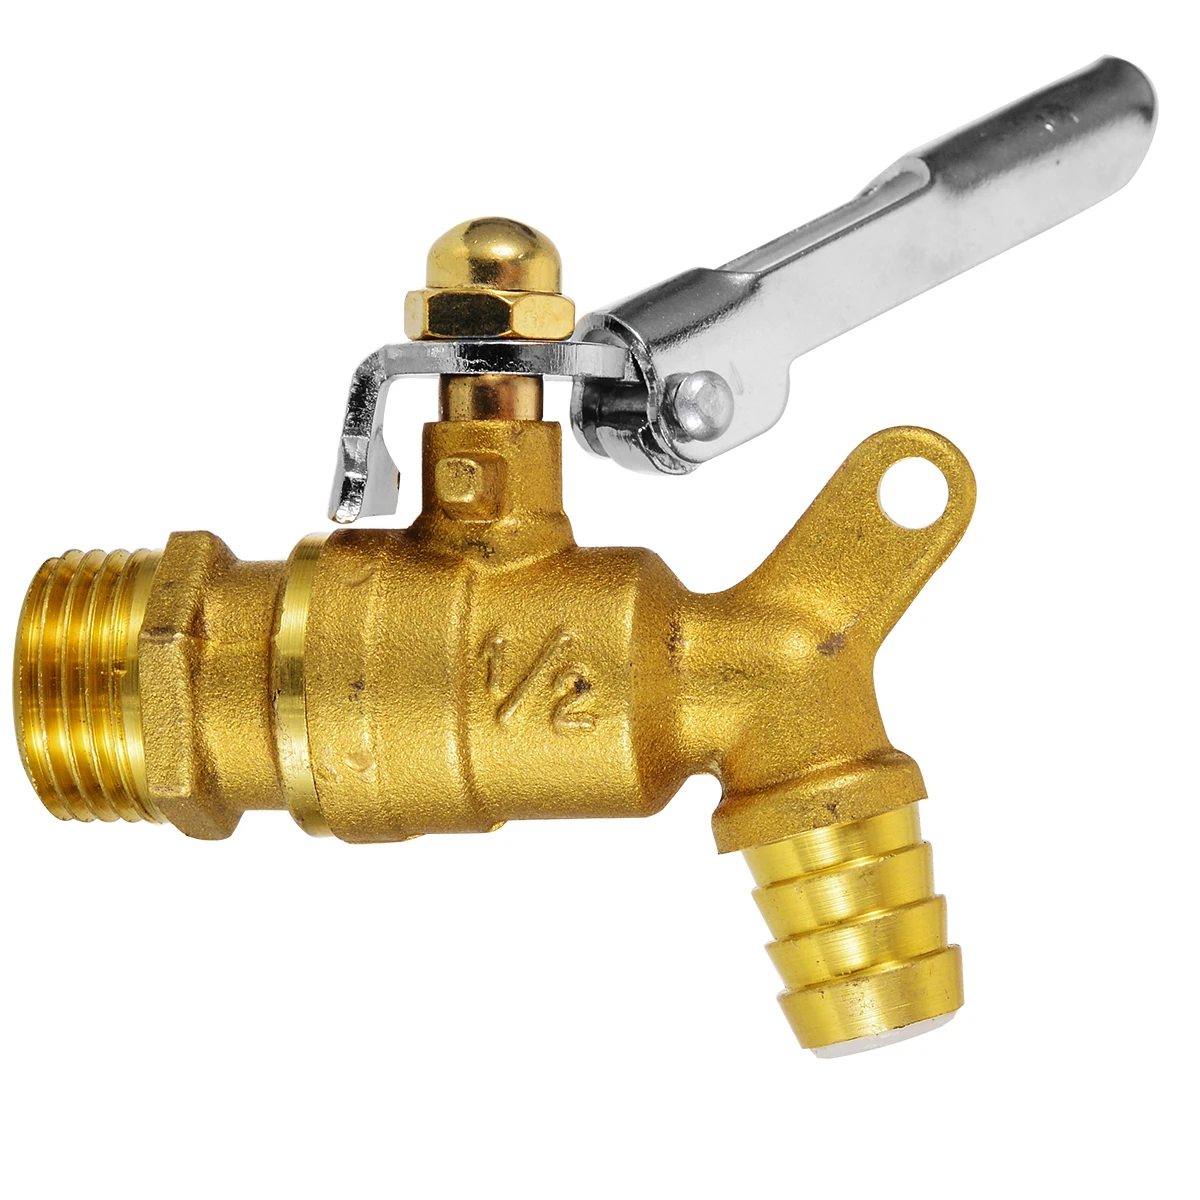 Locked DN15 1/2'' Faucet Locked Brass Water Tap For Outdoor Garden Tools 